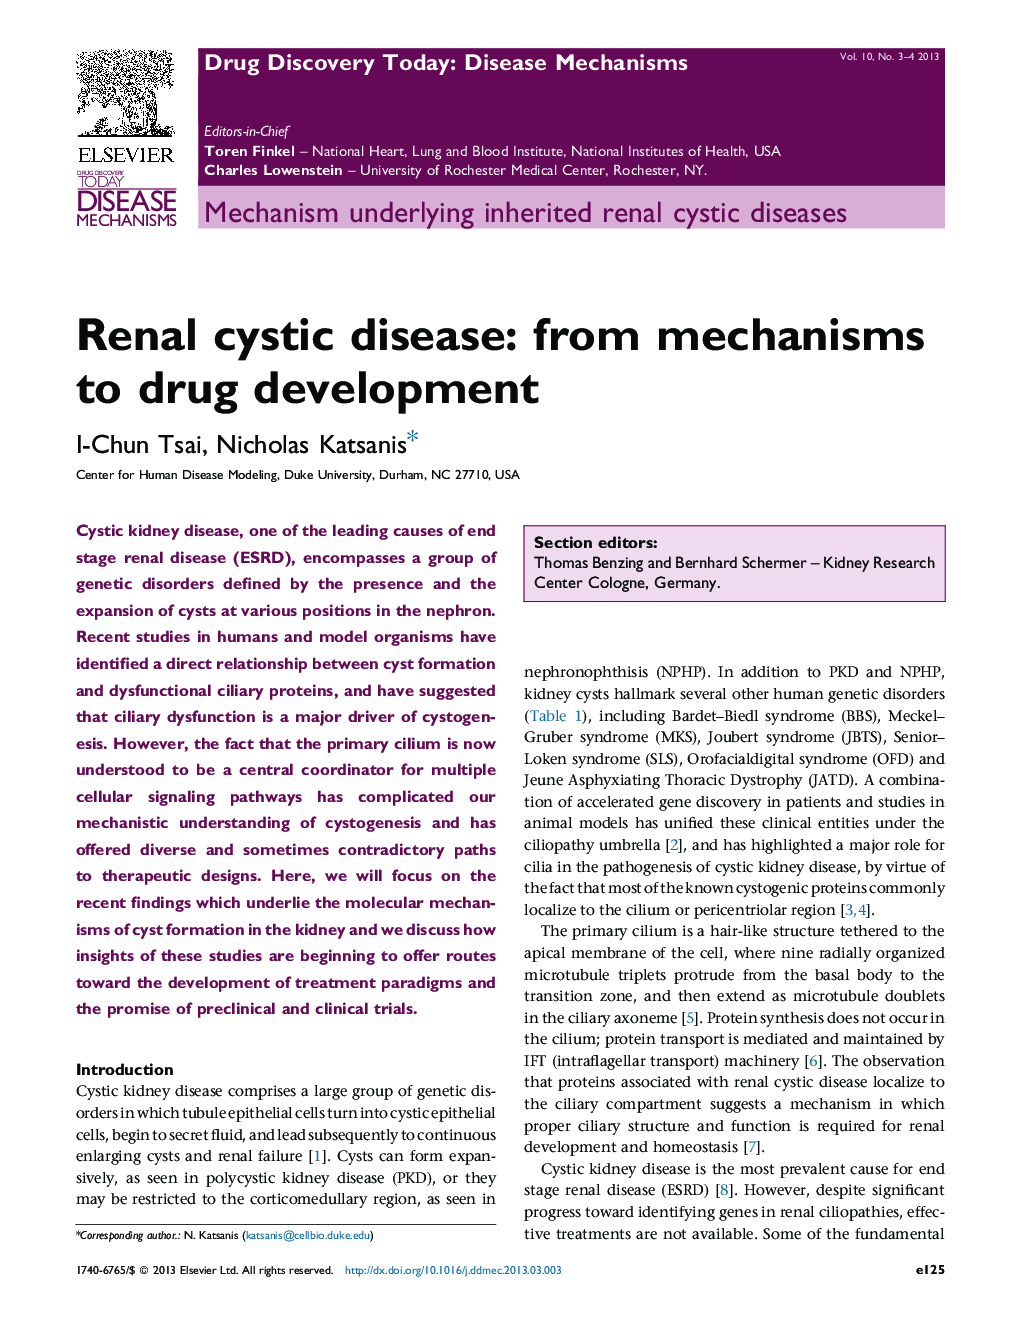 Renal cystic disease: from mechanisms to drug development